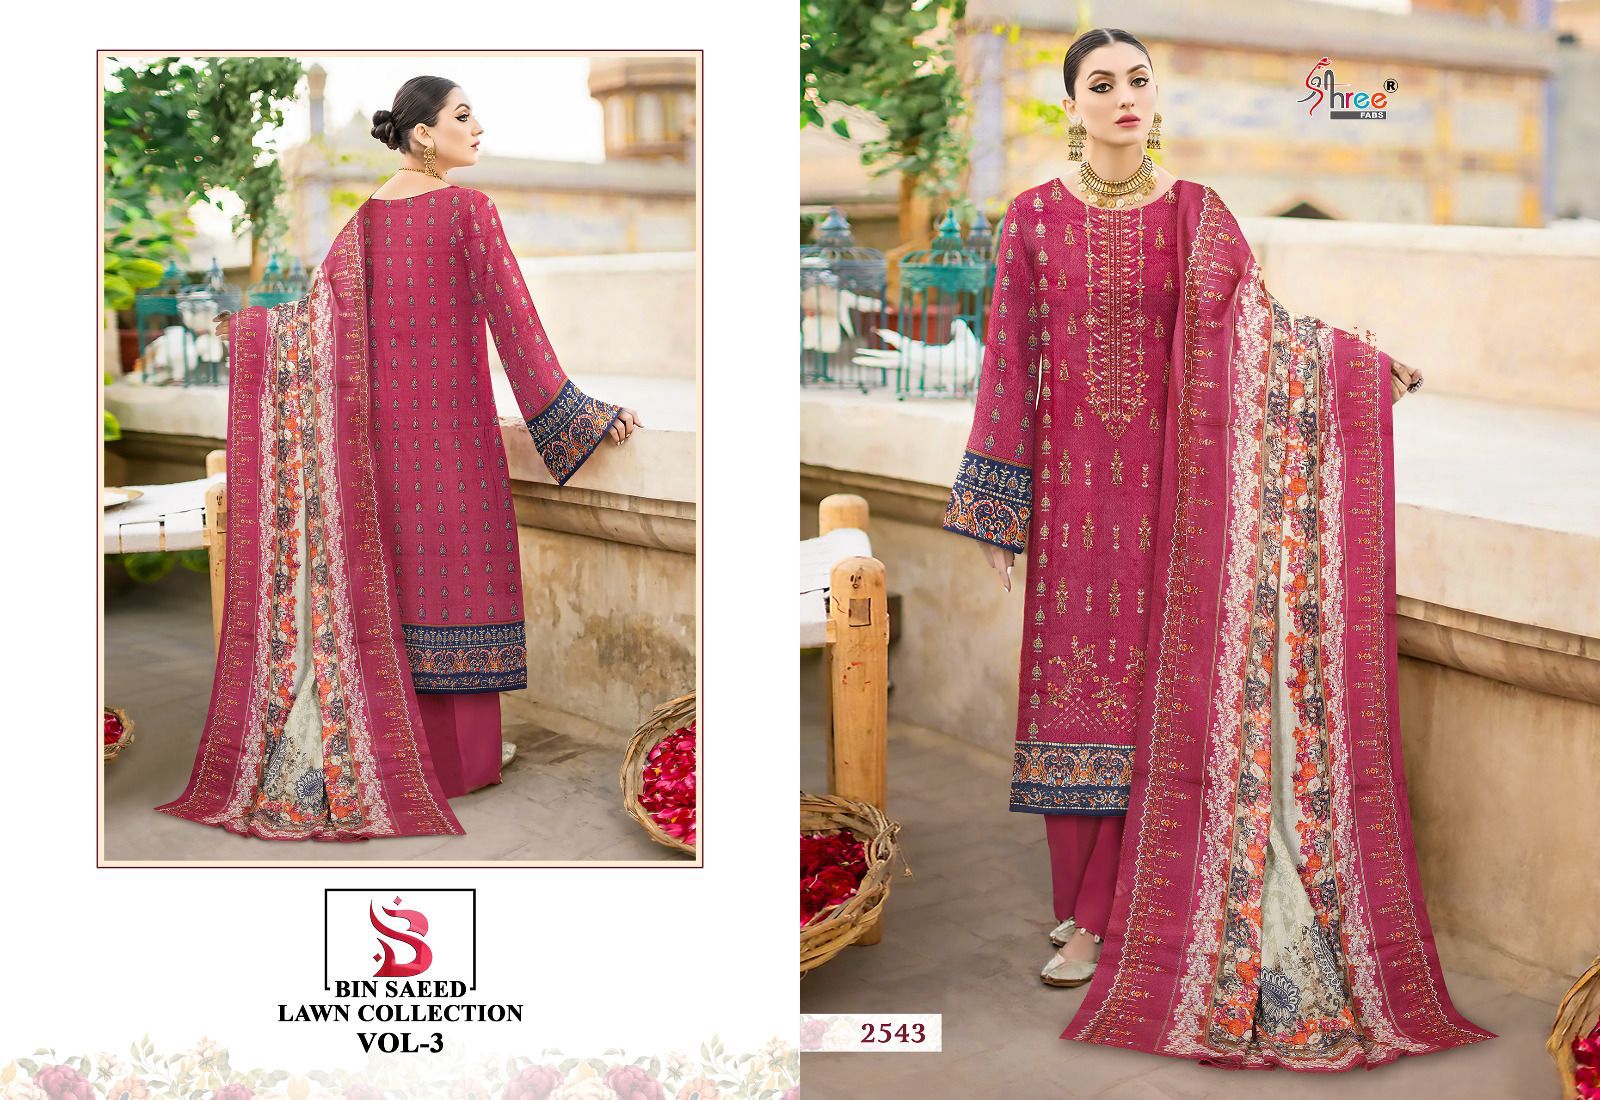 Shree Bin Saeed Lawn Collection Vol 3 collection 5